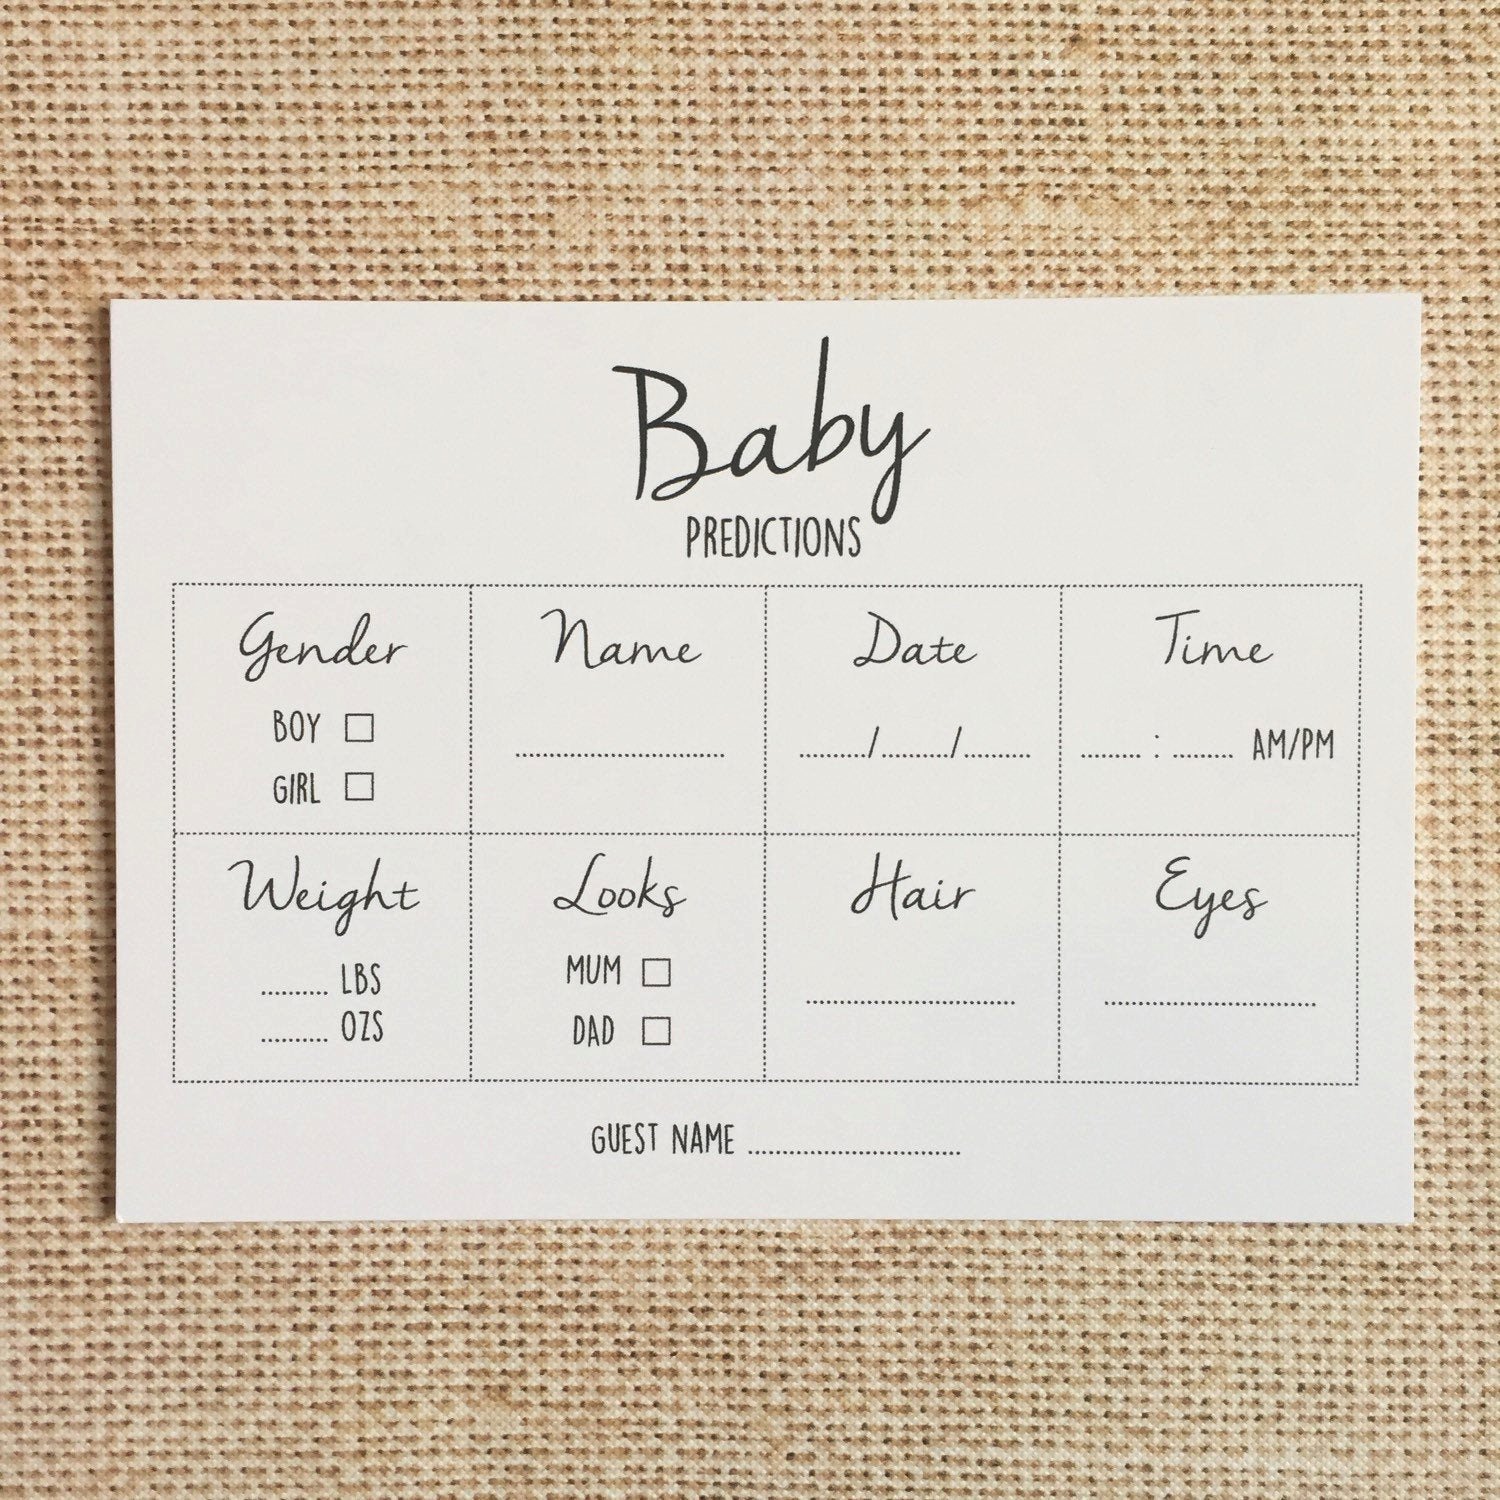 Baby Shower Card Printable Luxury Baby Prediction Cards for Baby Shower Party Pk 10